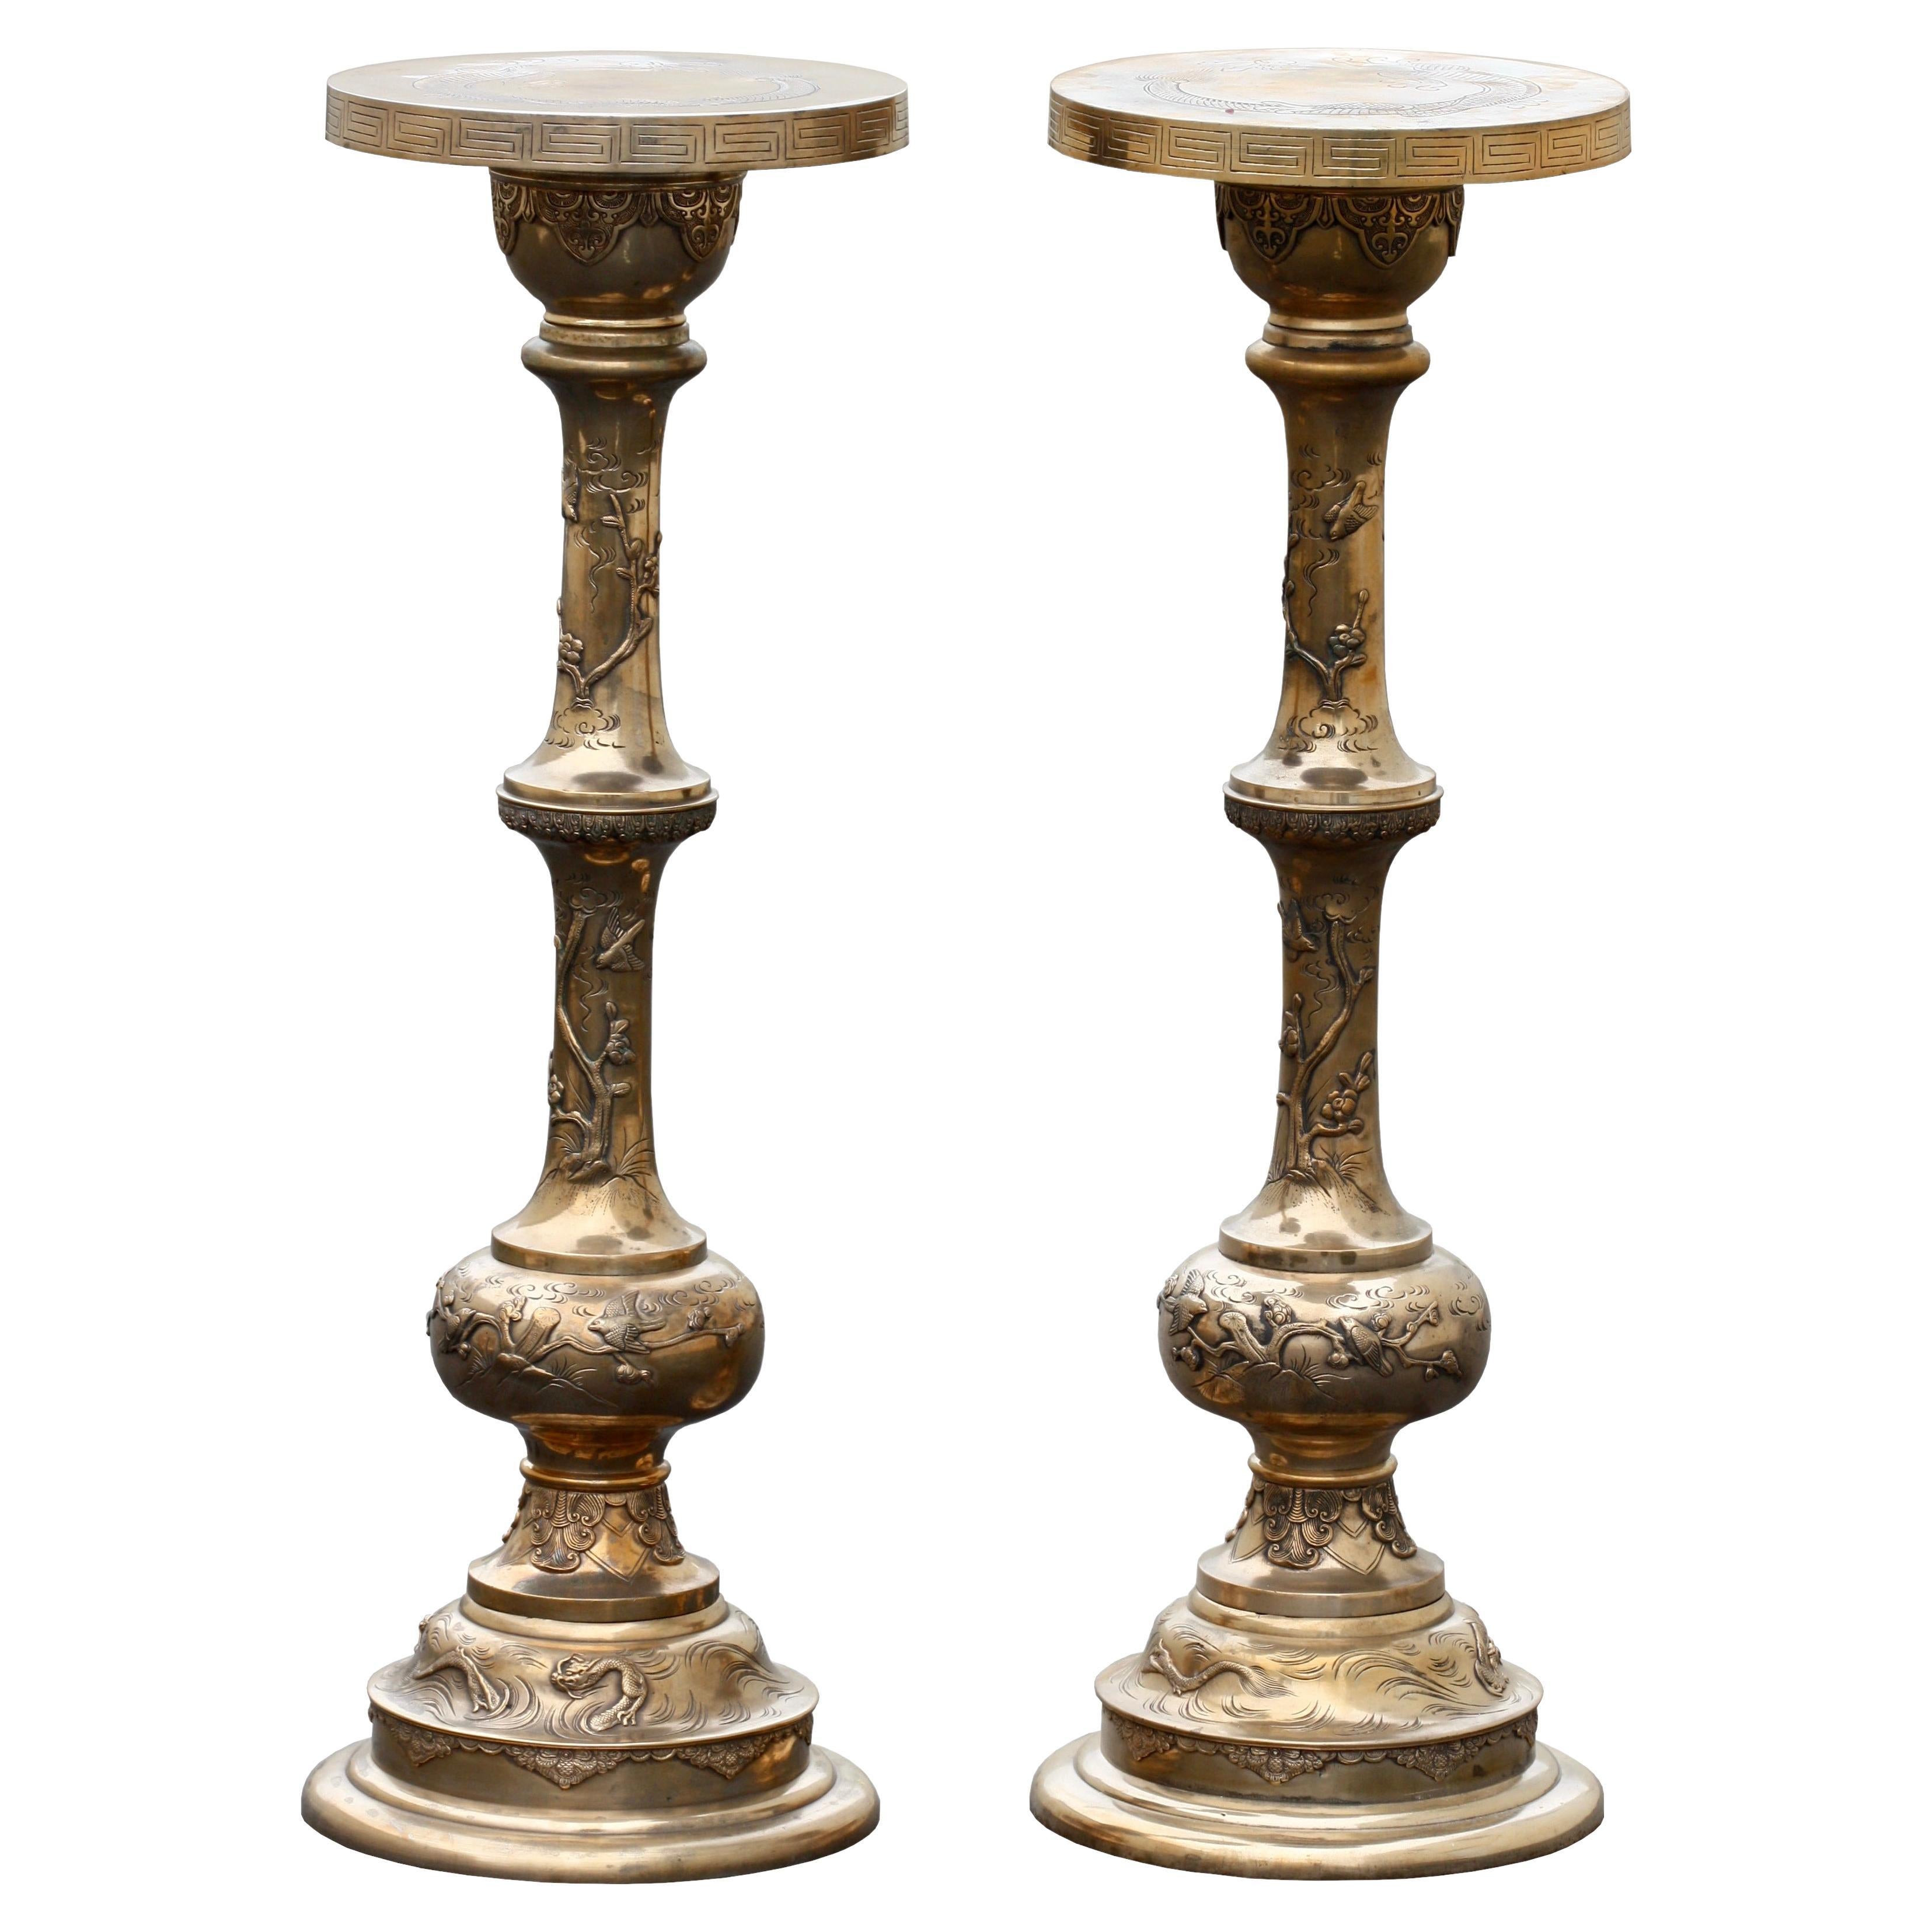 Pair of Chinese Brass Pedestal Stands